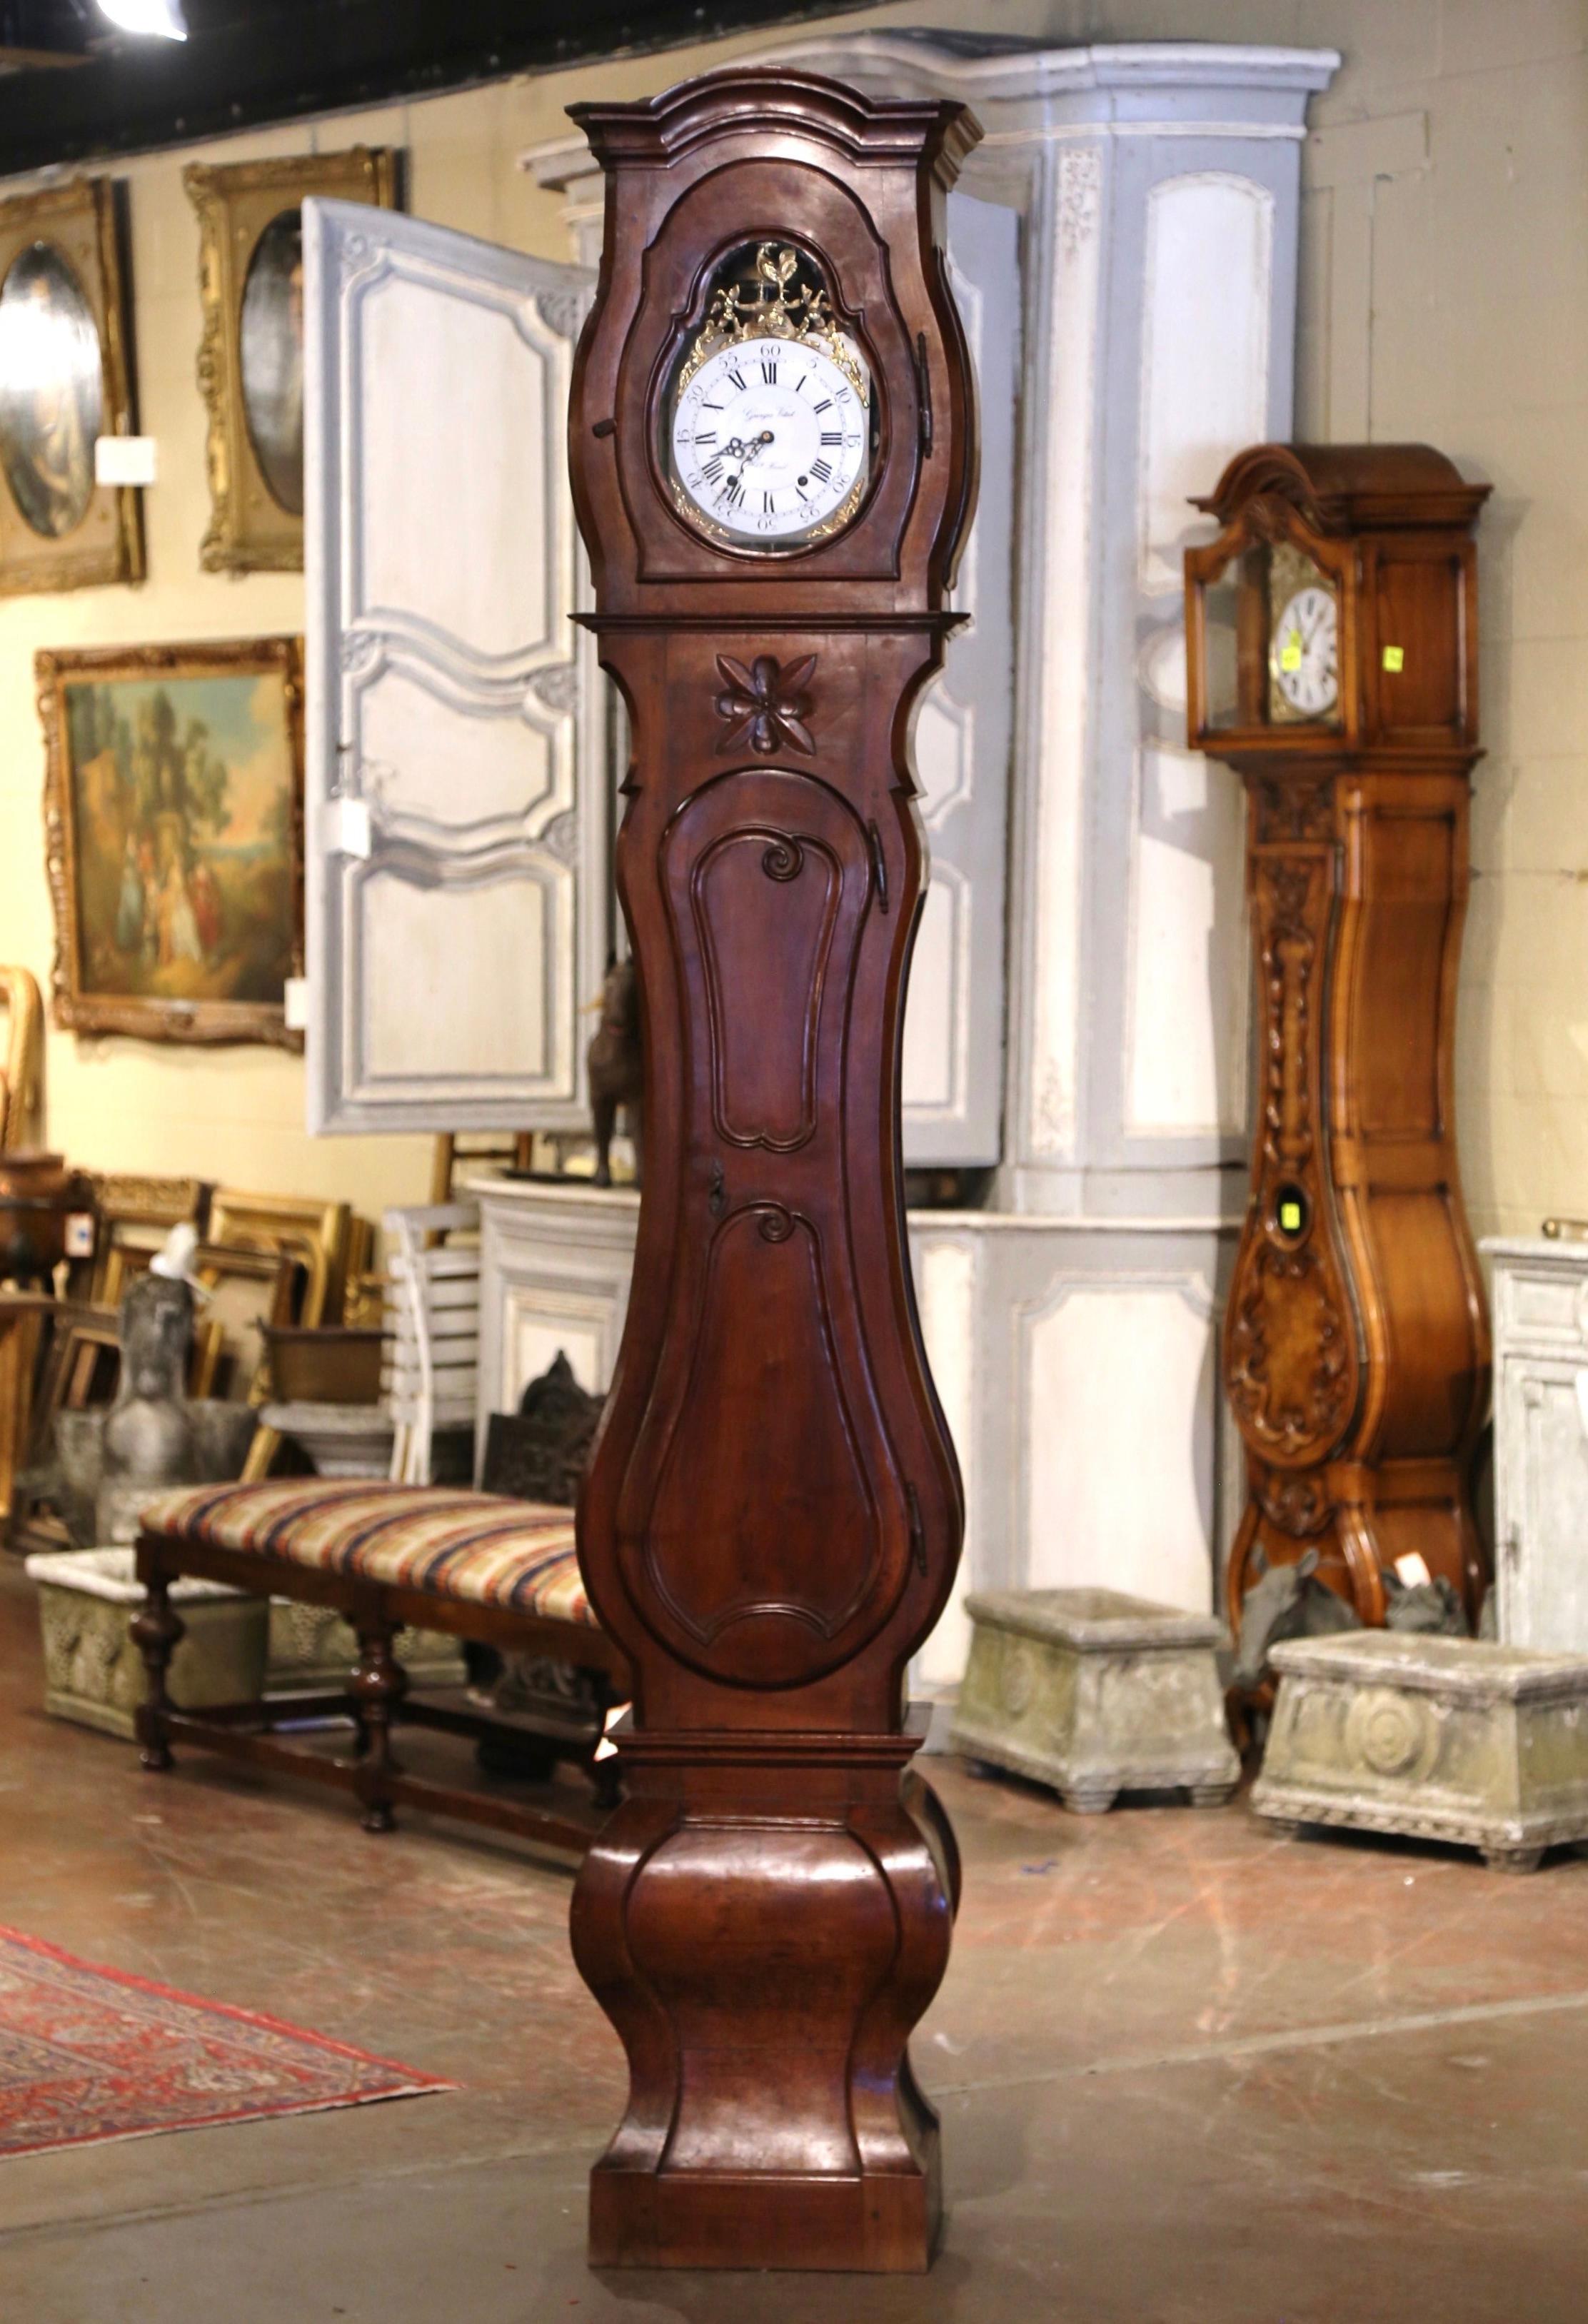 This elegant, antique long case clock was crafted in Lyon, France, circa 1780. The fruitwood grandfather clock built in two sections has beautiful lines including an elegant bonnet top at the pediment, a long center door with raised panel and